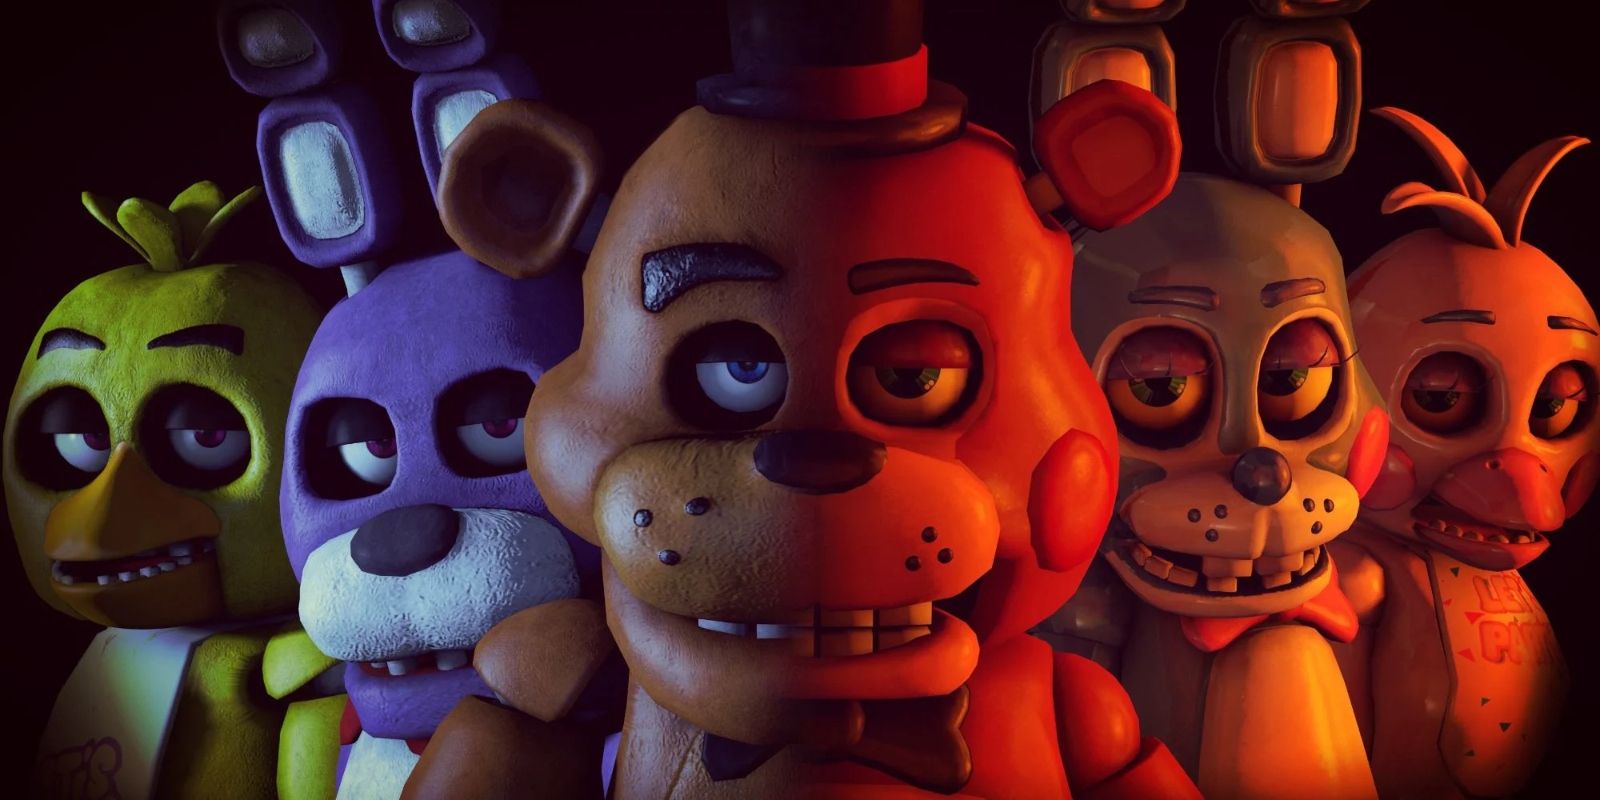 Five Nights At Freddys Cast